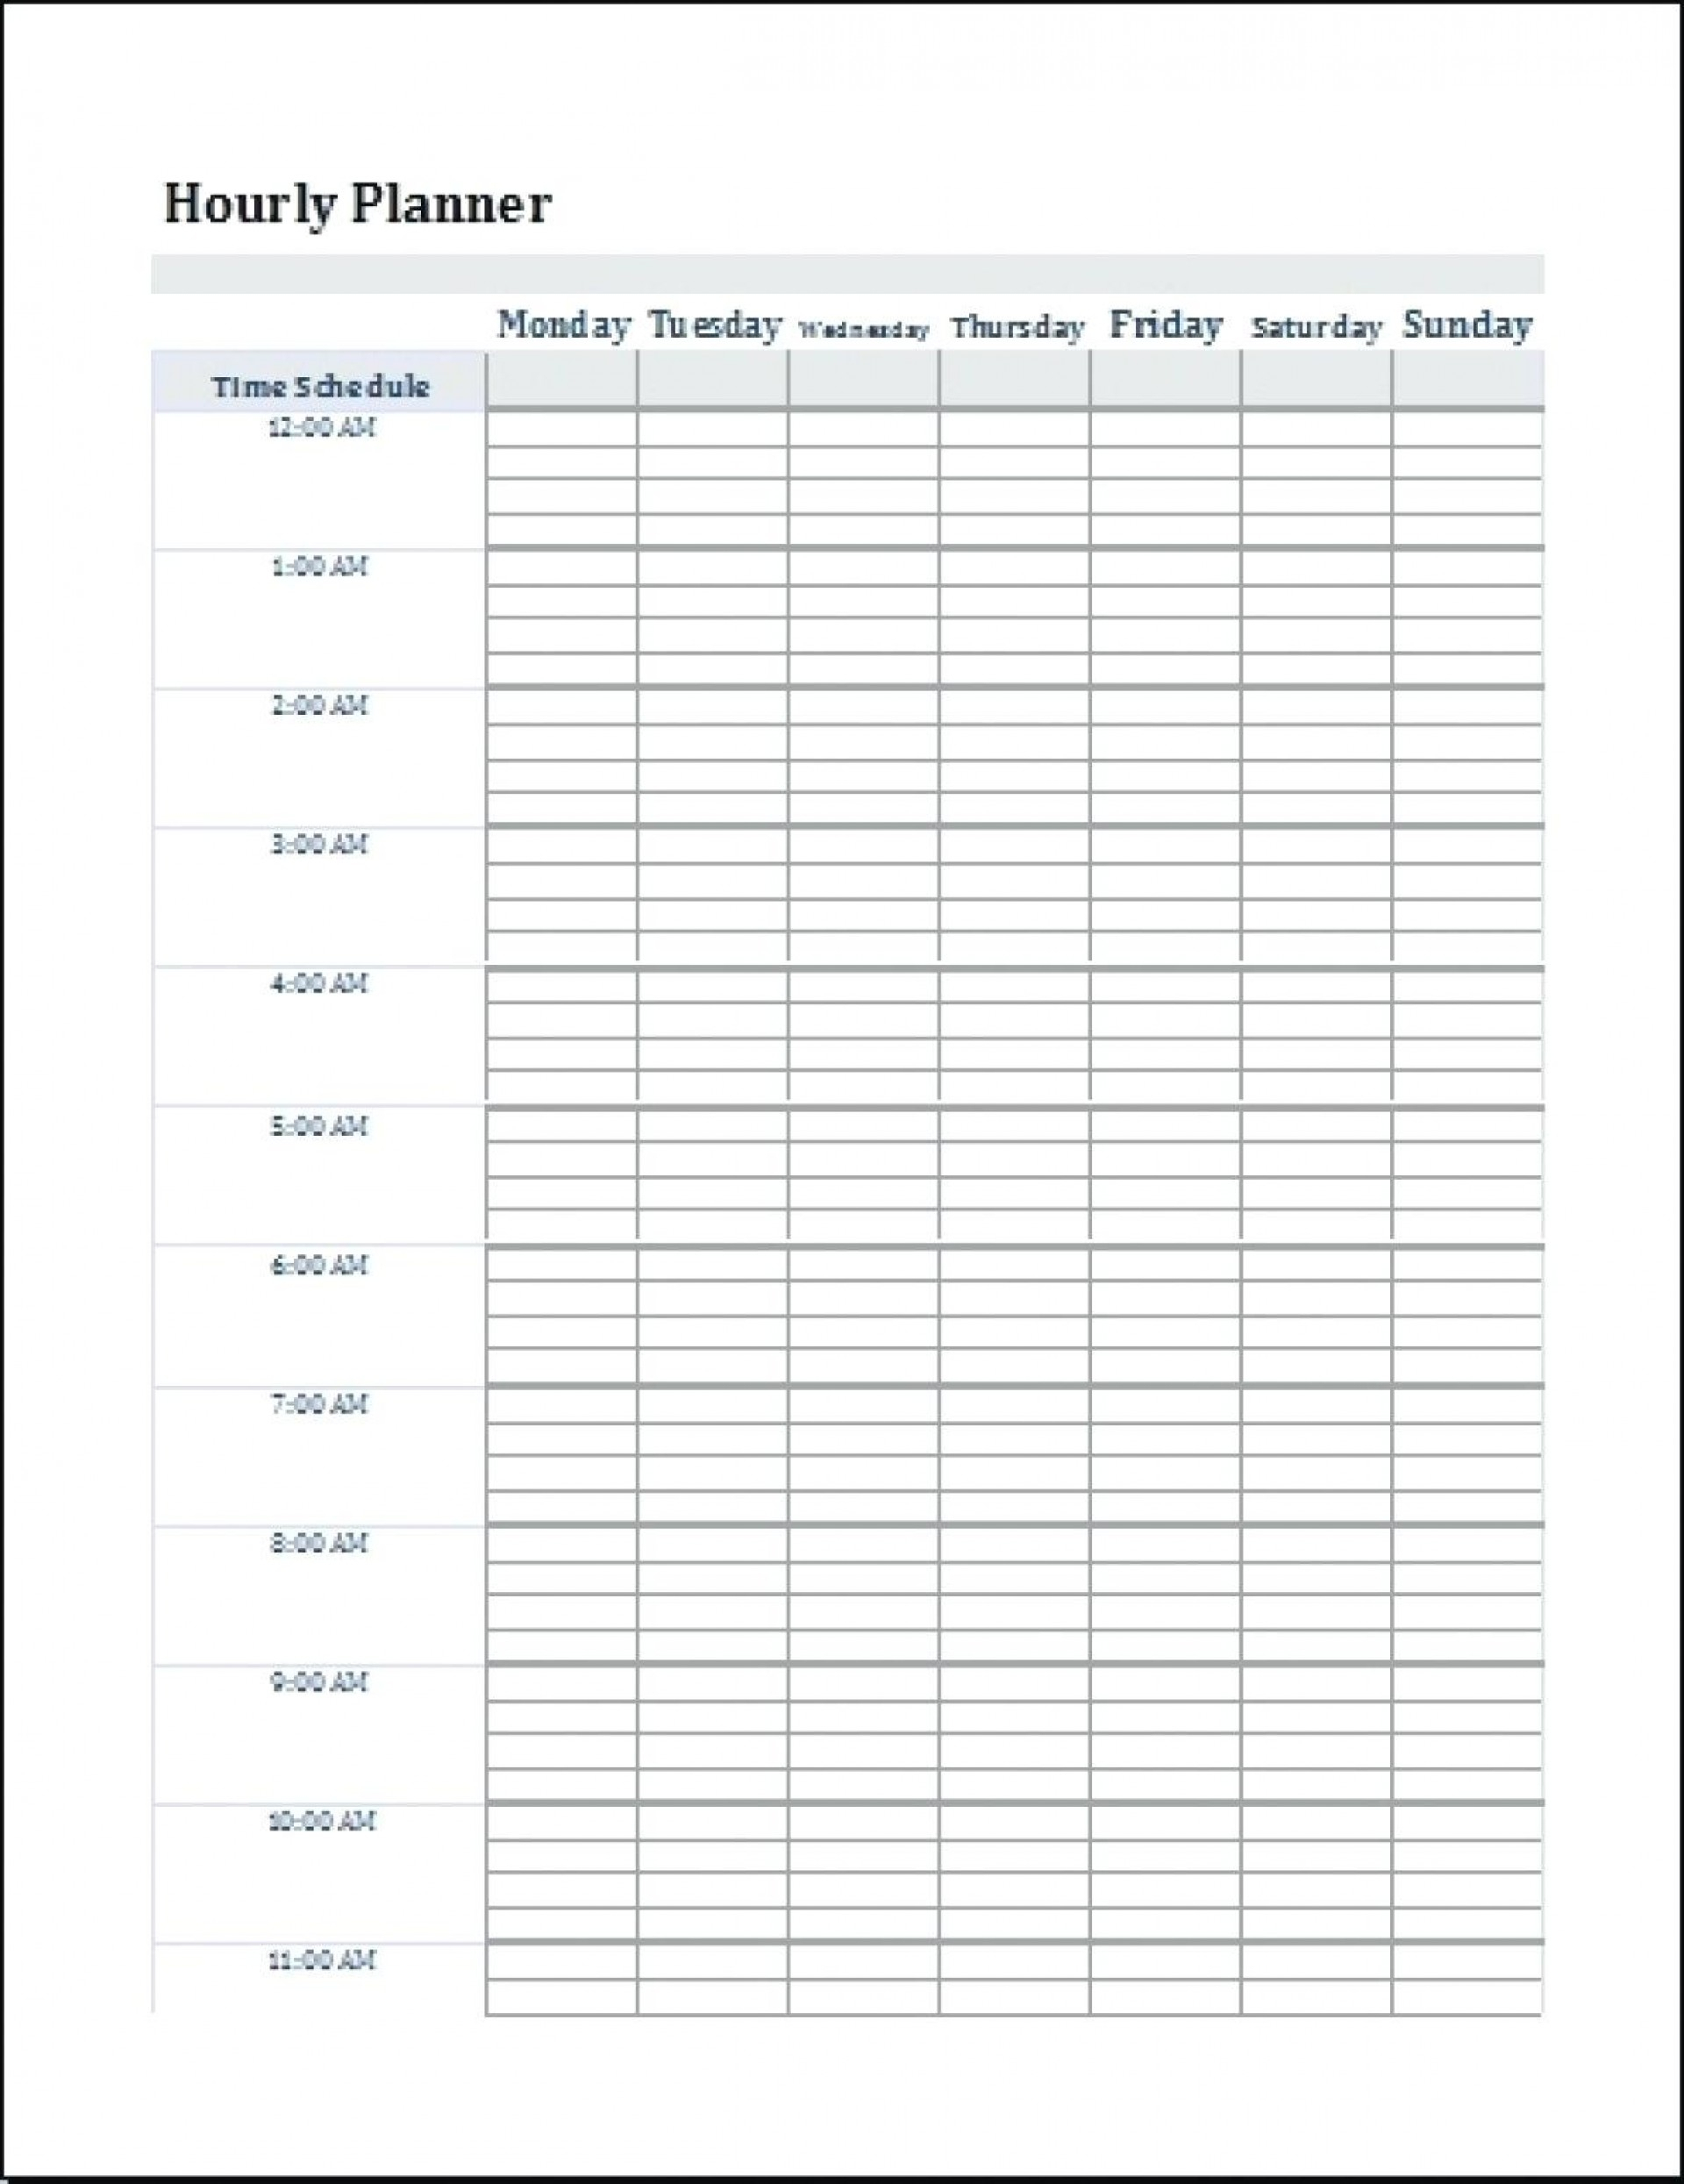 010 Template Ideas Weekly Hourly Schedule Calendar Excel throughout Printable Weekly Hourly Schedule